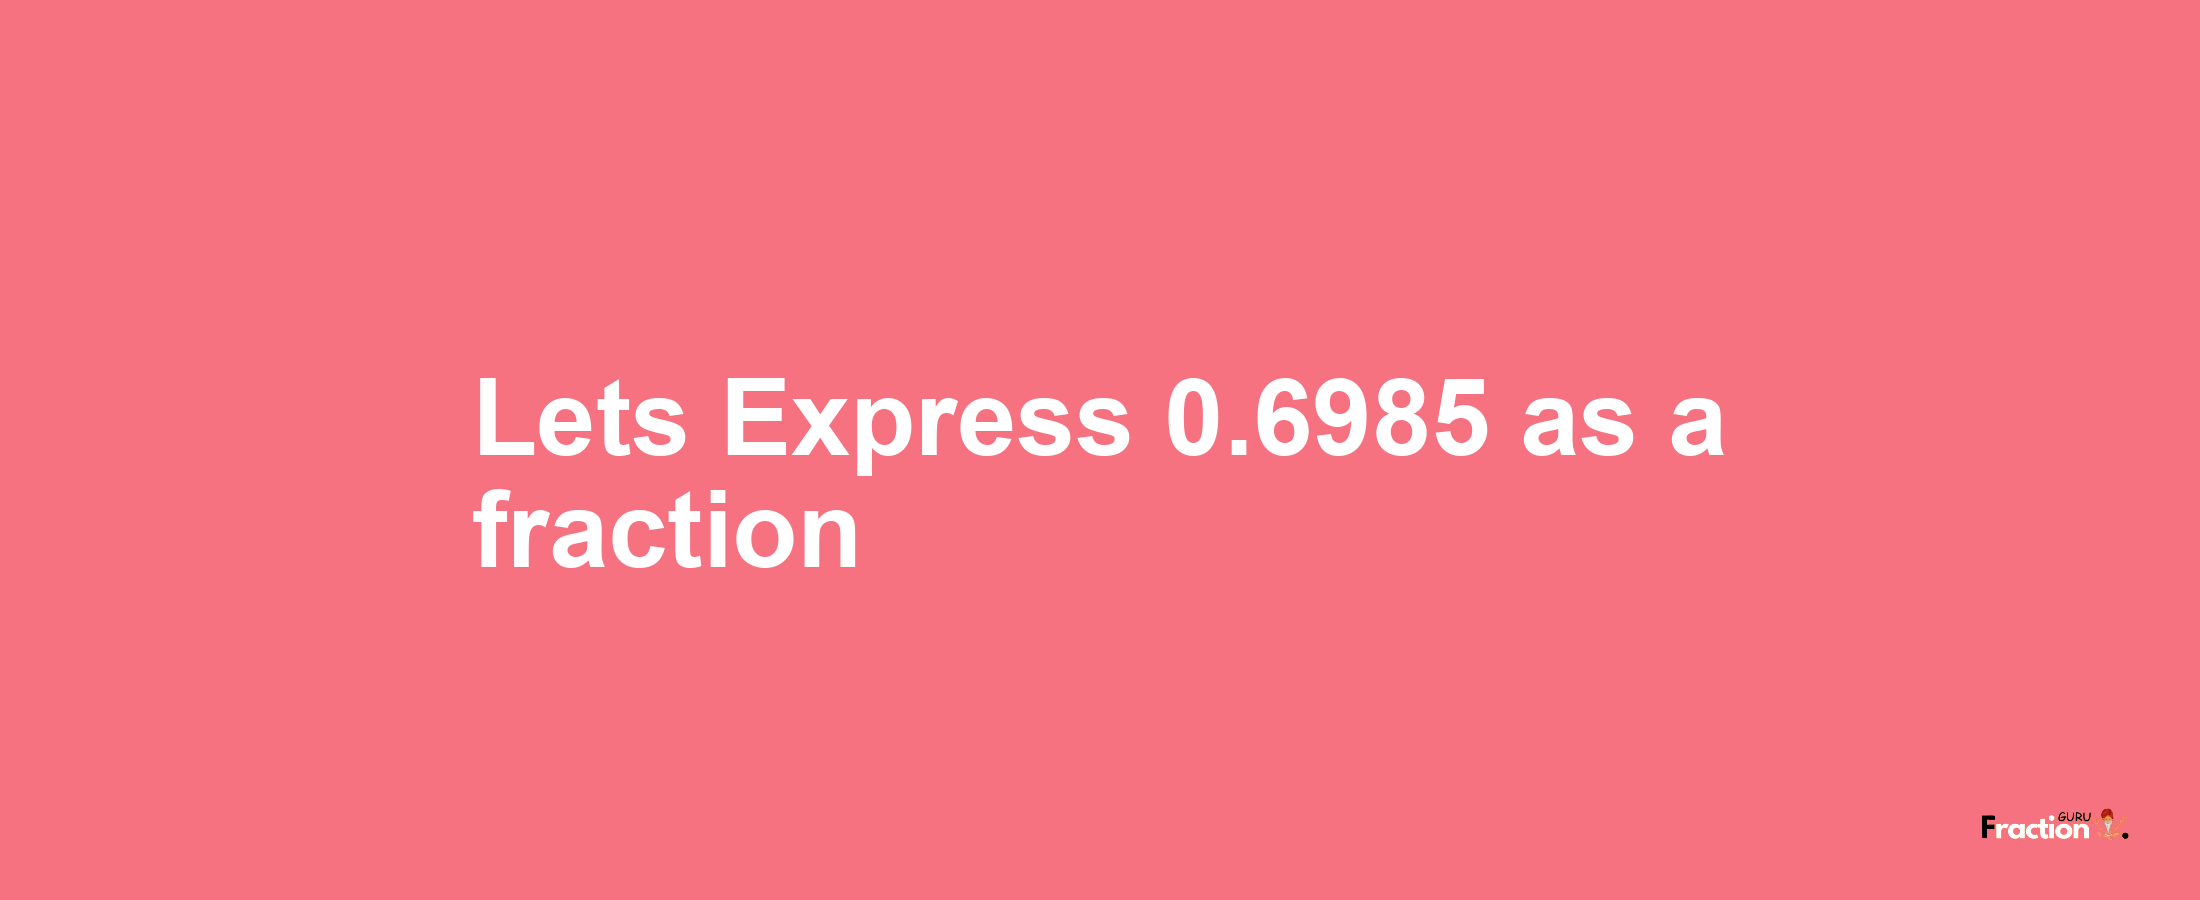 Lets Express 0.6985 as afraction